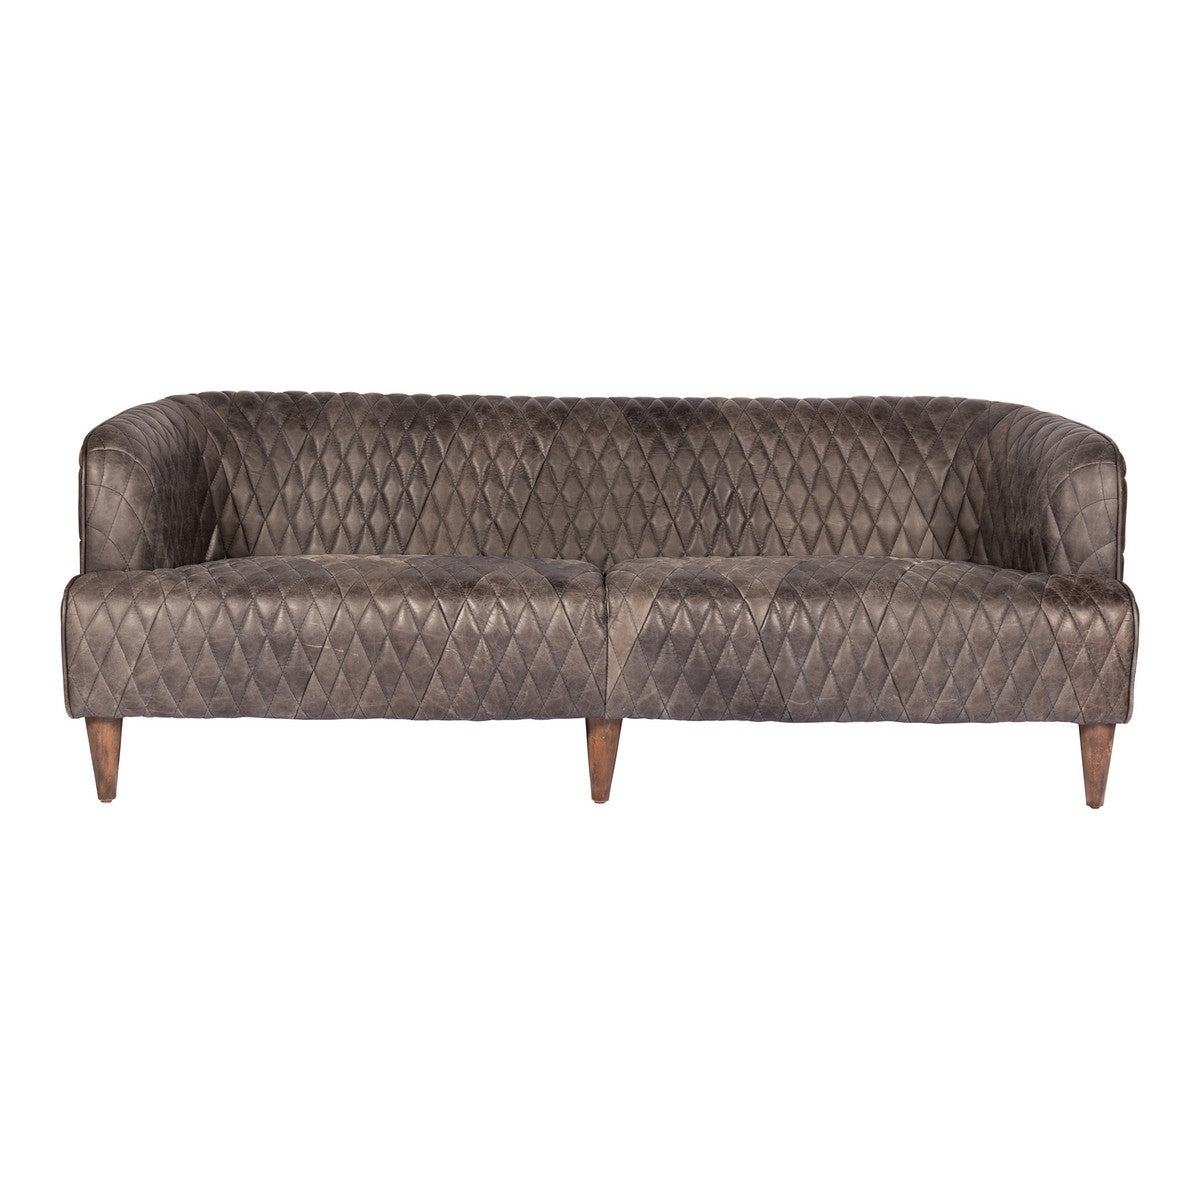 Moe's Home Collection Magdelan Tufted Leather Sofa Antique Ebony - PK-1077-47